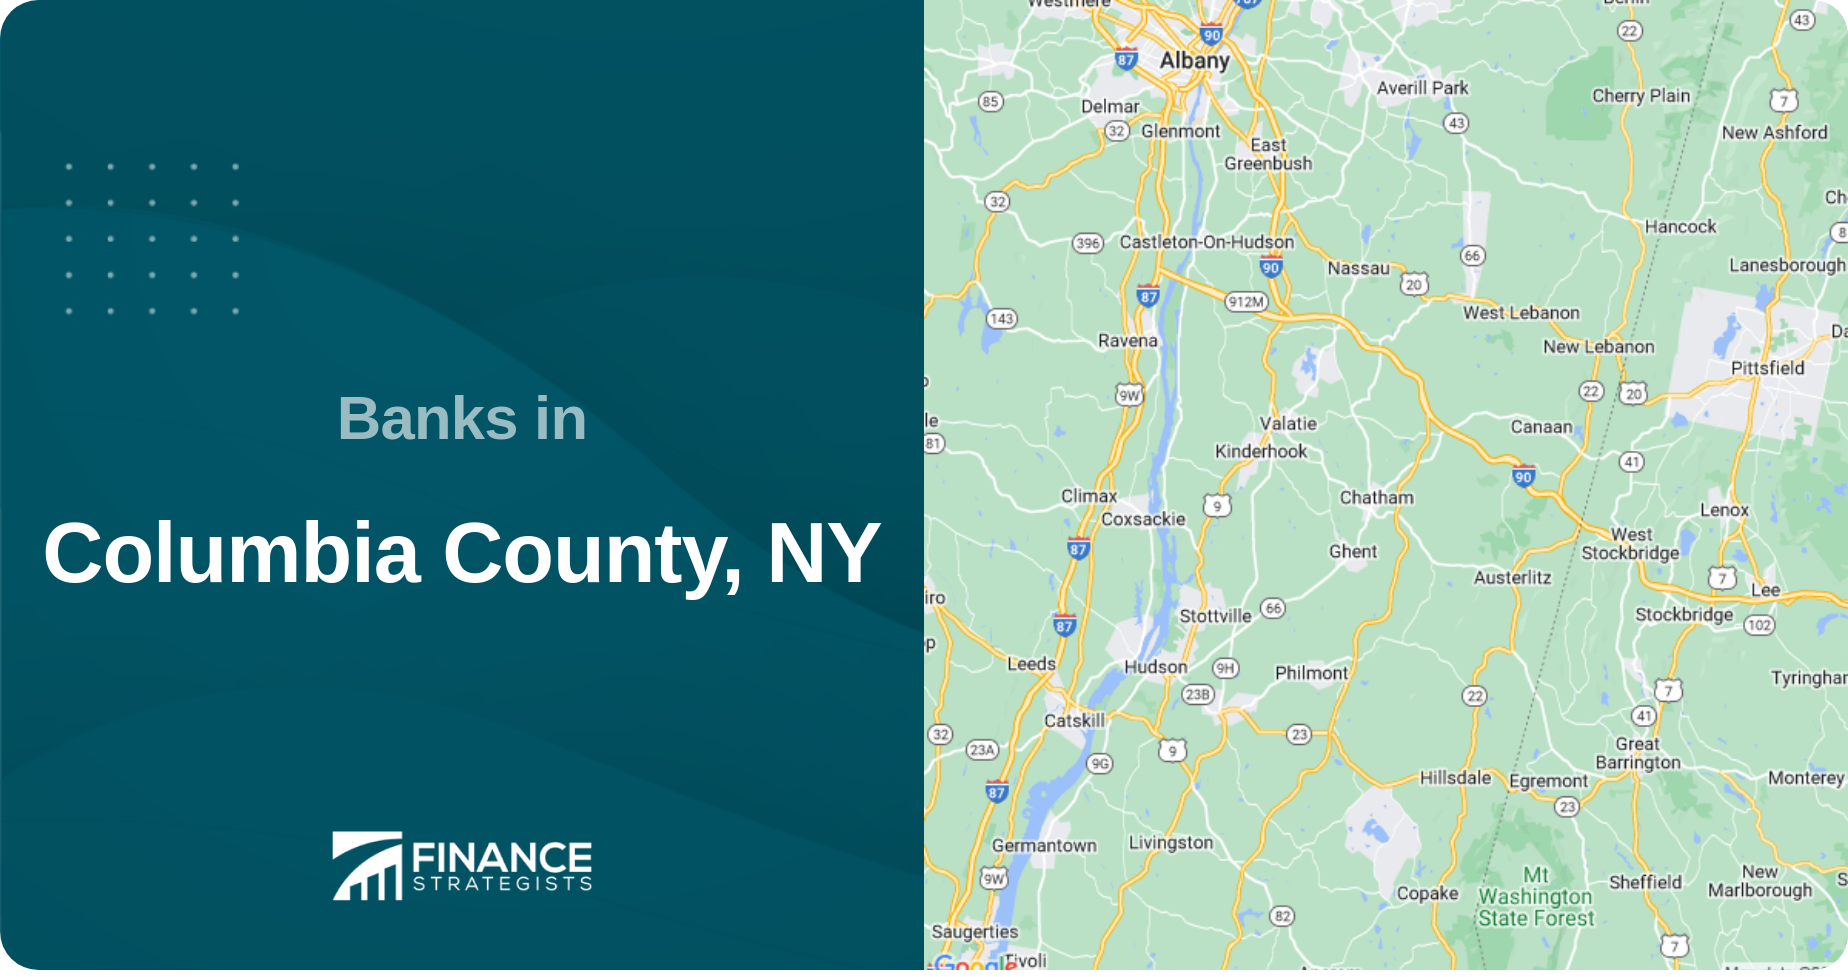 Banks in Columbia County, NY